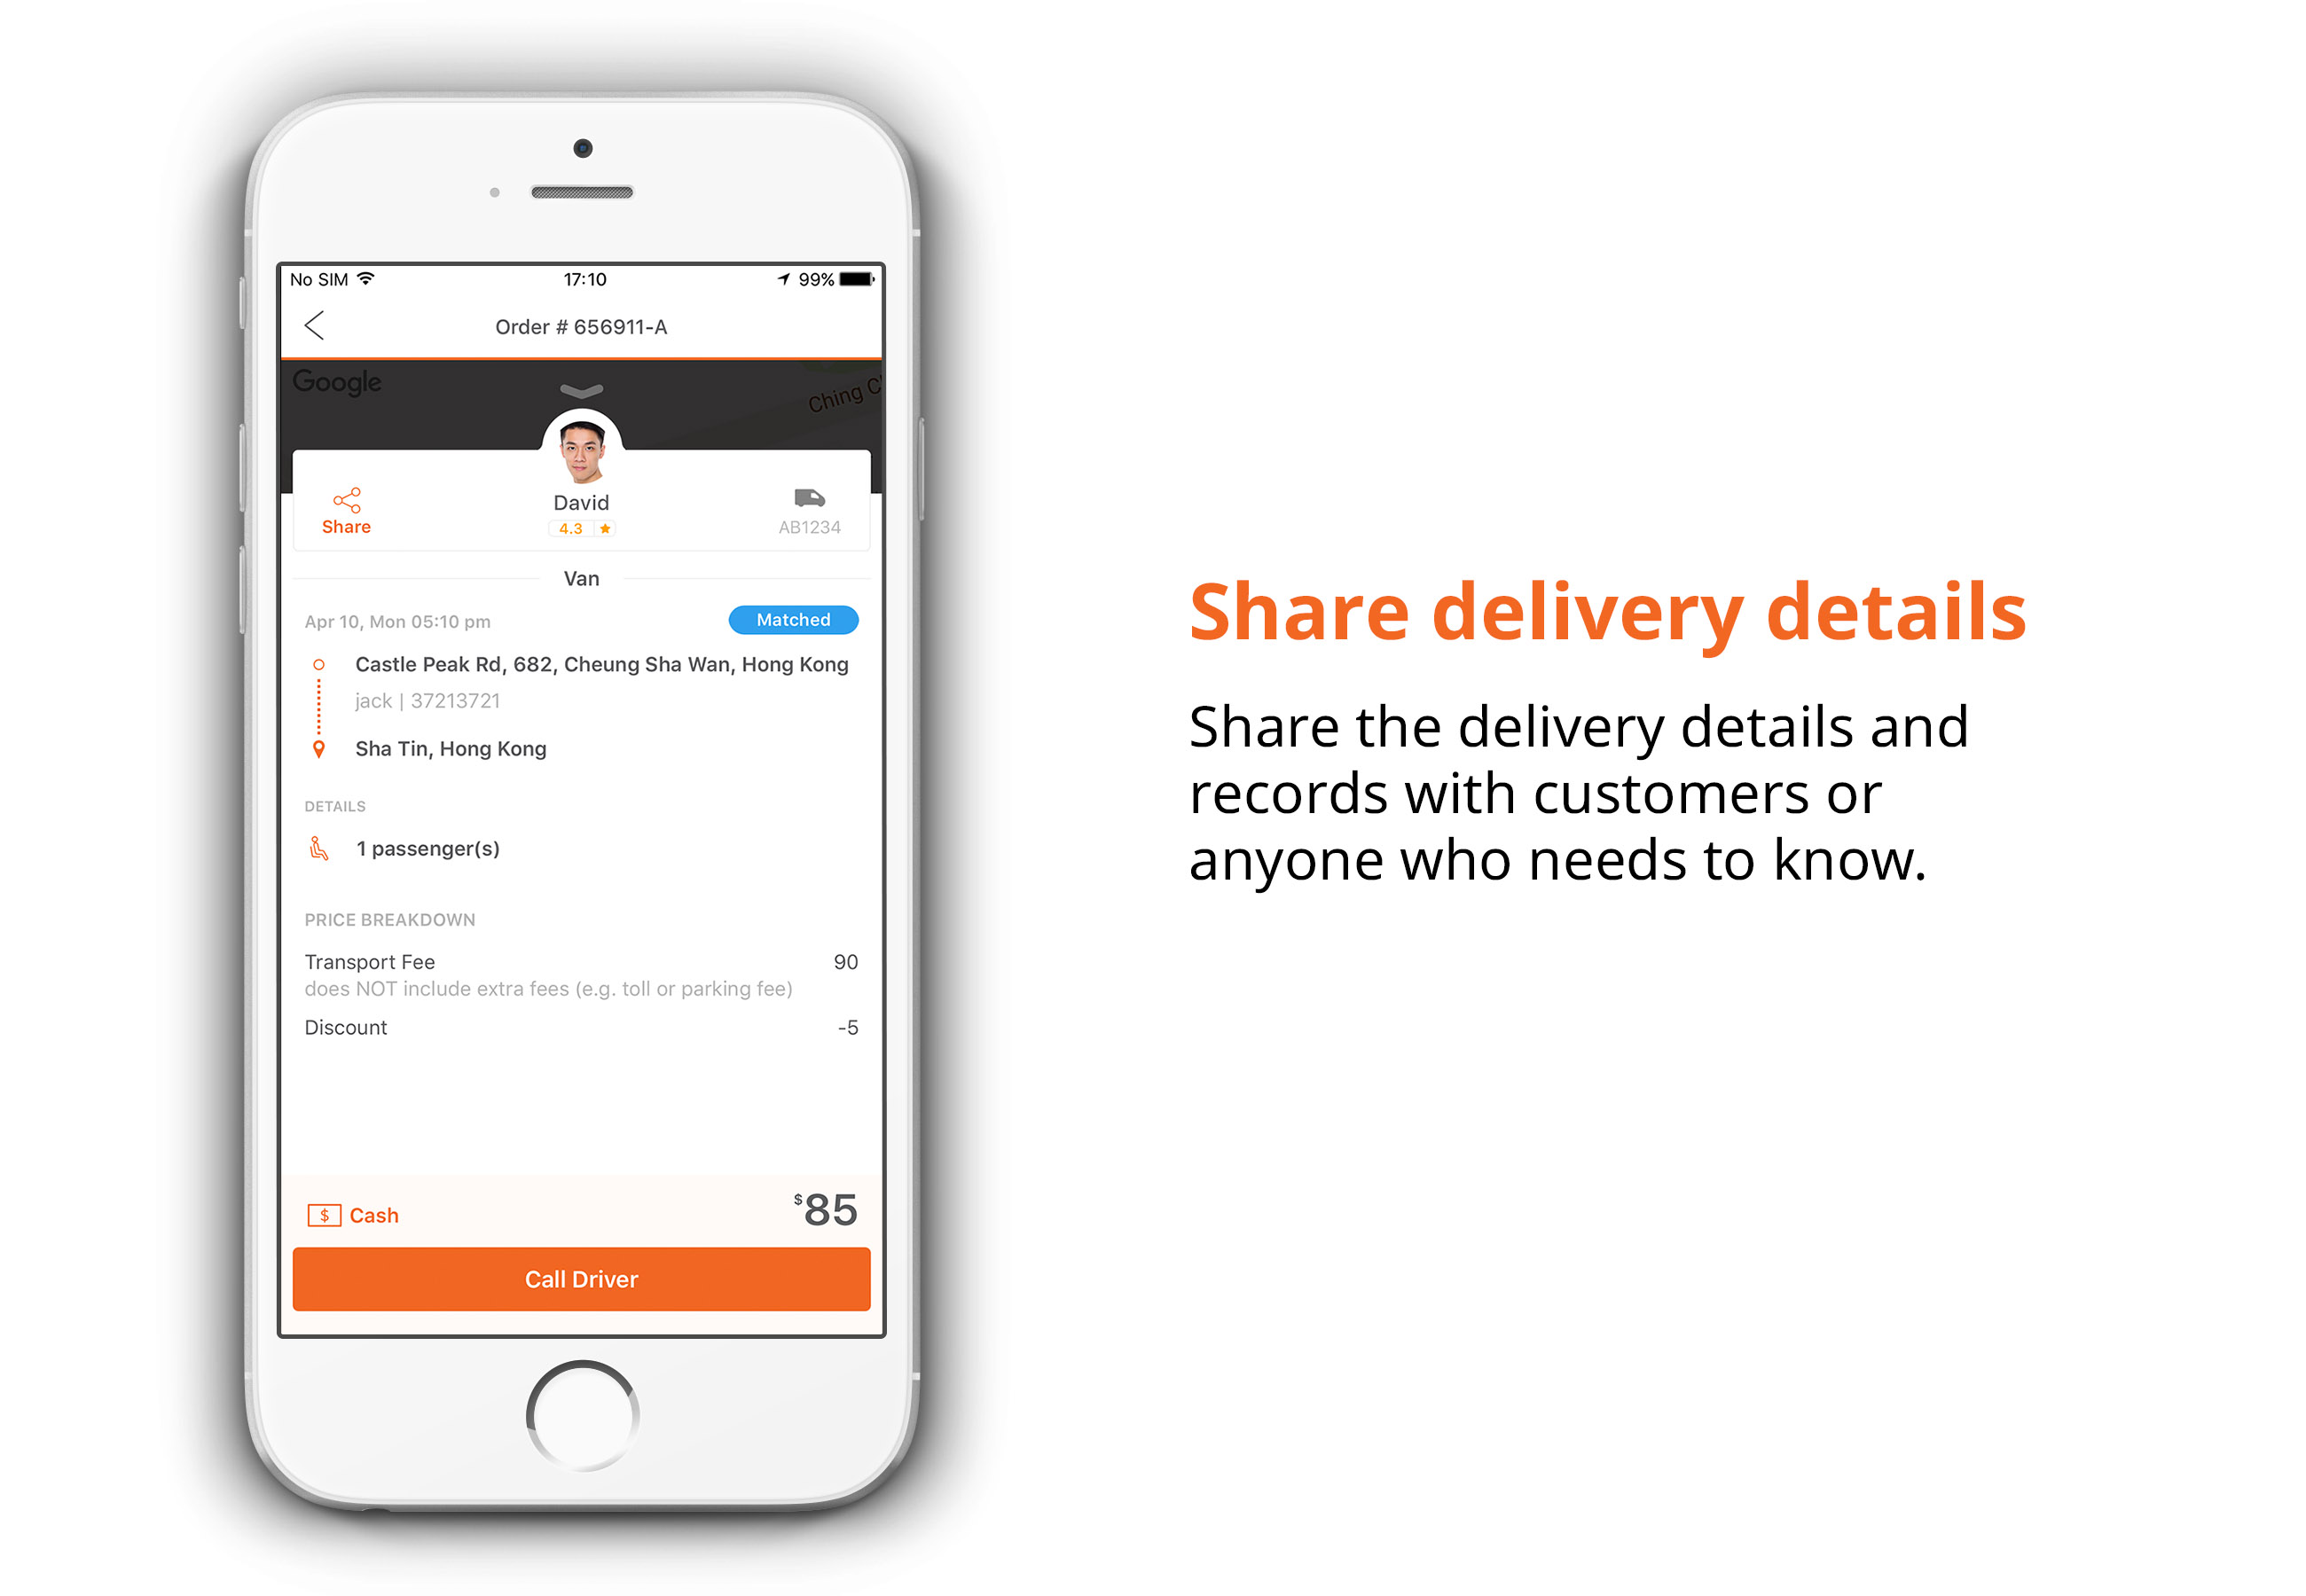 Share delivery details